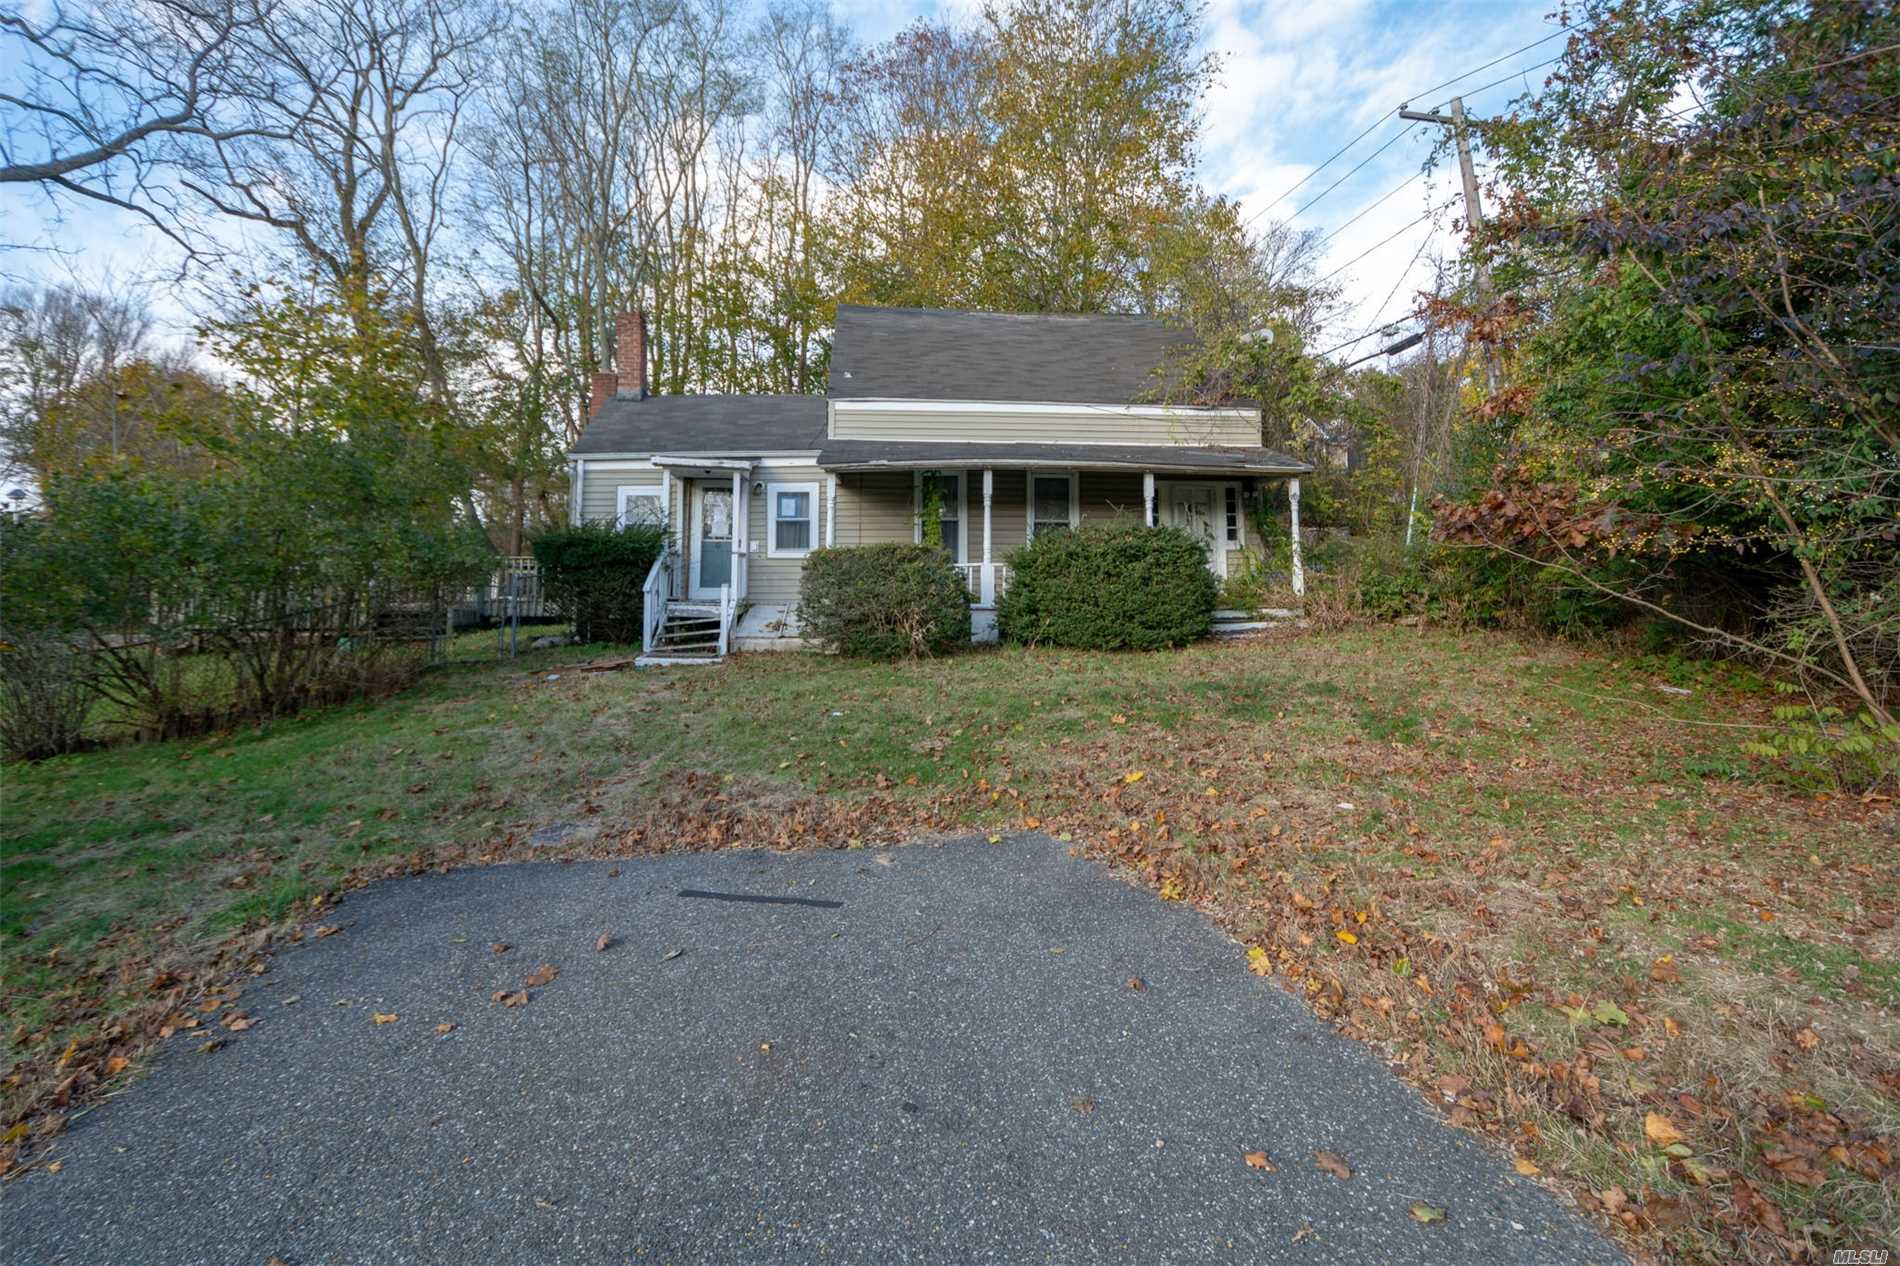 This 4-bedroom, 1.5-bathroom split-level home is now available in Suffolk County. This property has approximately 1, 854 square feet of living space, sits on roughly a 0.46 acre lot. A property you definitely don&rsquo;t want to miss!